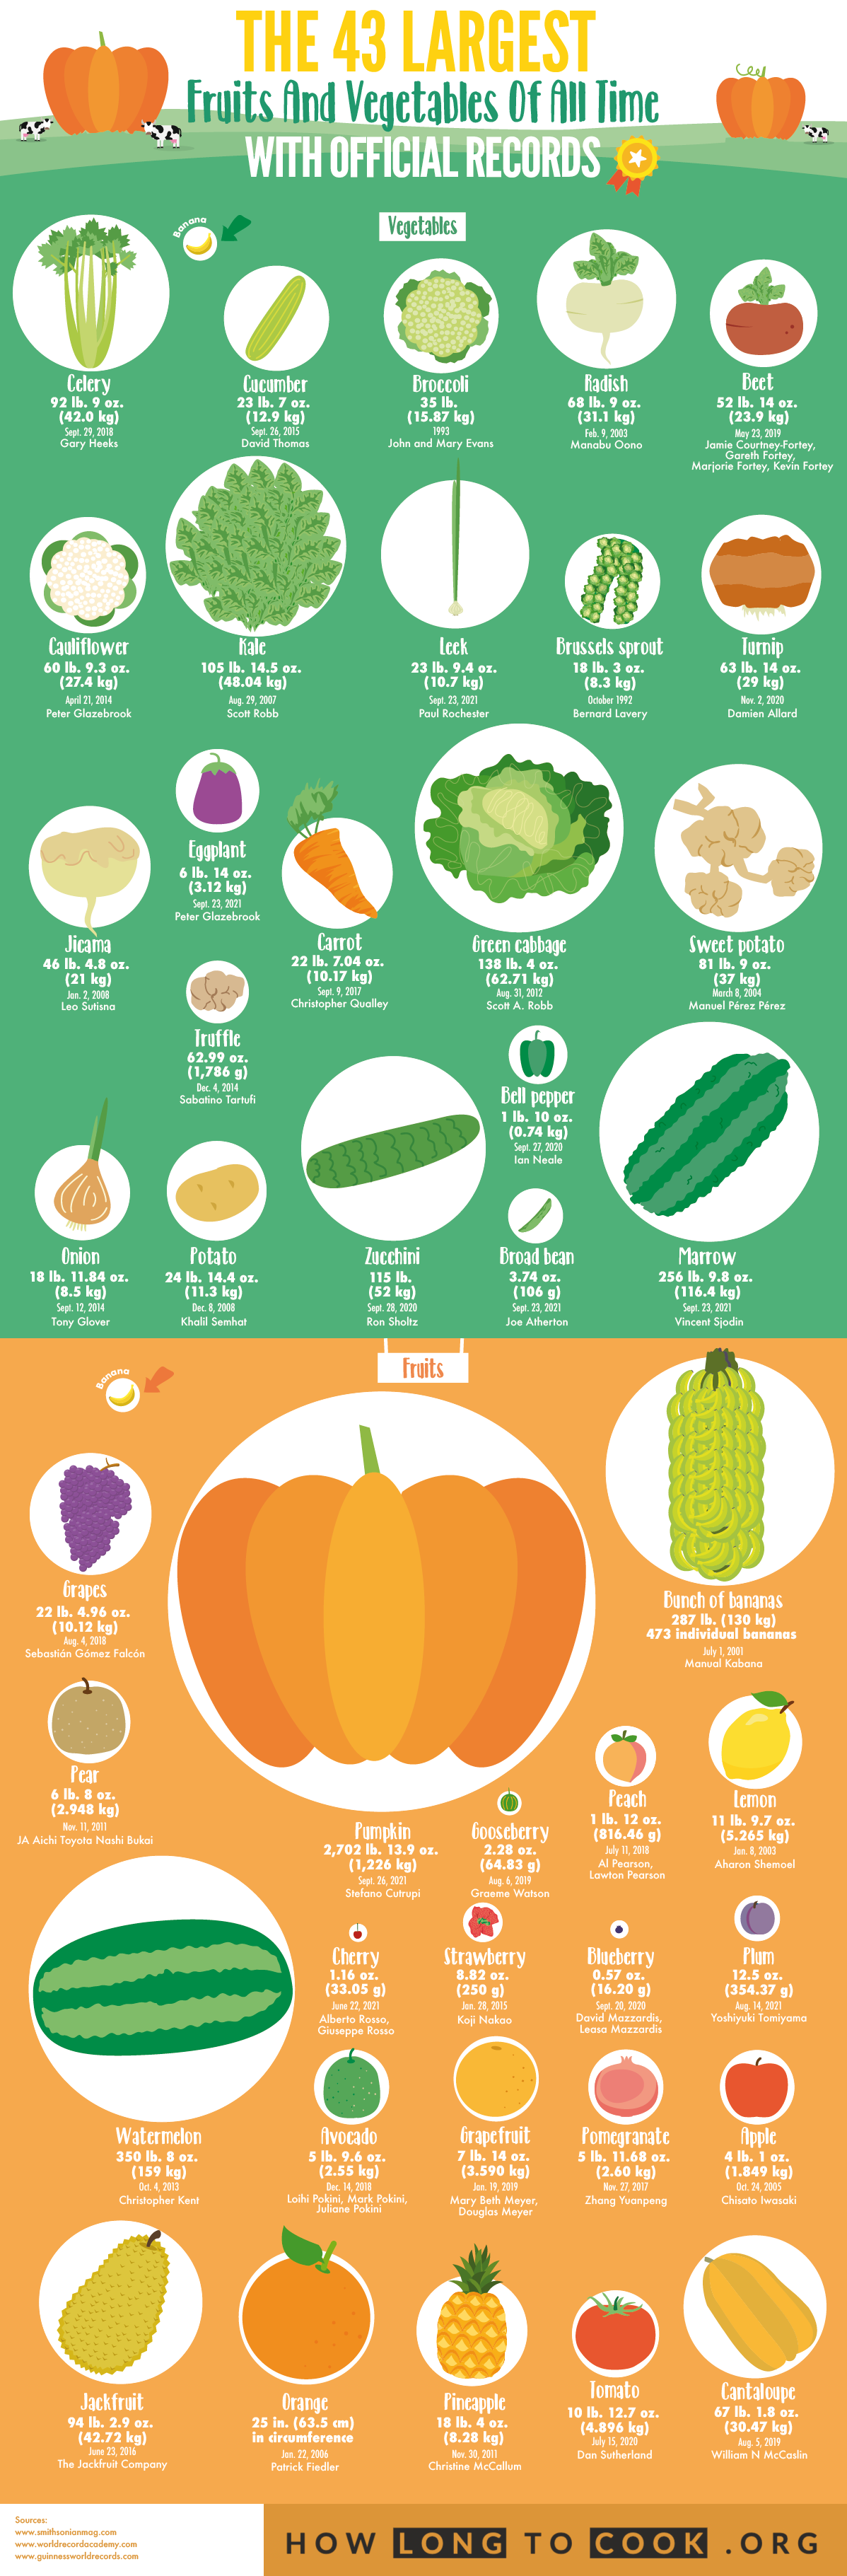 The 43 Largest Fruits and Vegetables of All Time With Official Records - How Long To Cook Calculator - Infographic